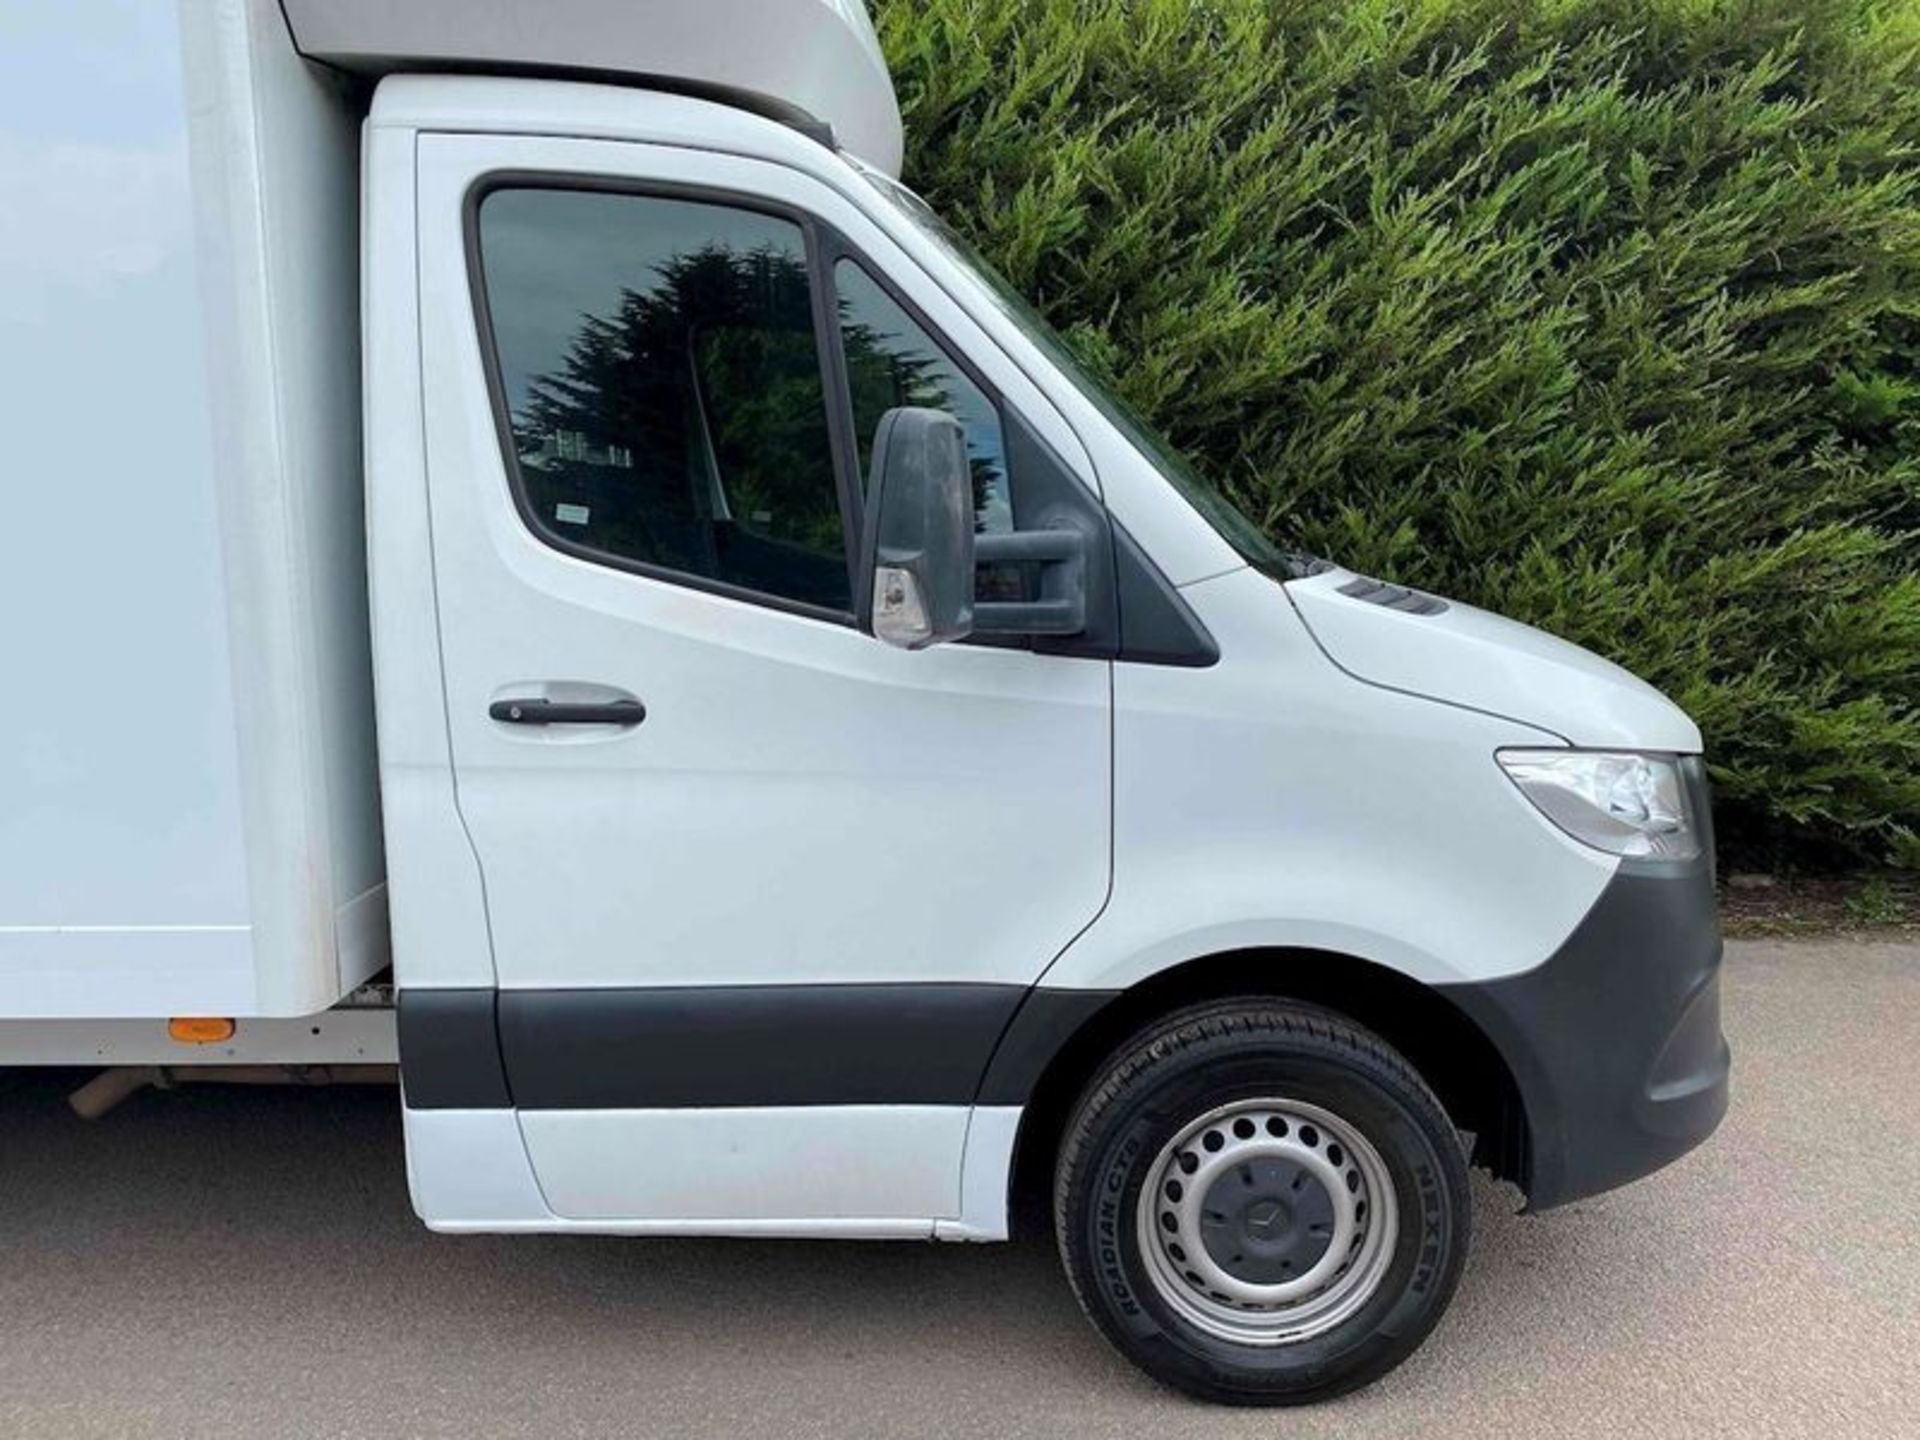 (RESERVE MET)Mercedes Sprinter 314Cdi LWB Luton Body with TL - 2020 20 Reg 1 Owner - New Shape - Image 7 of 8